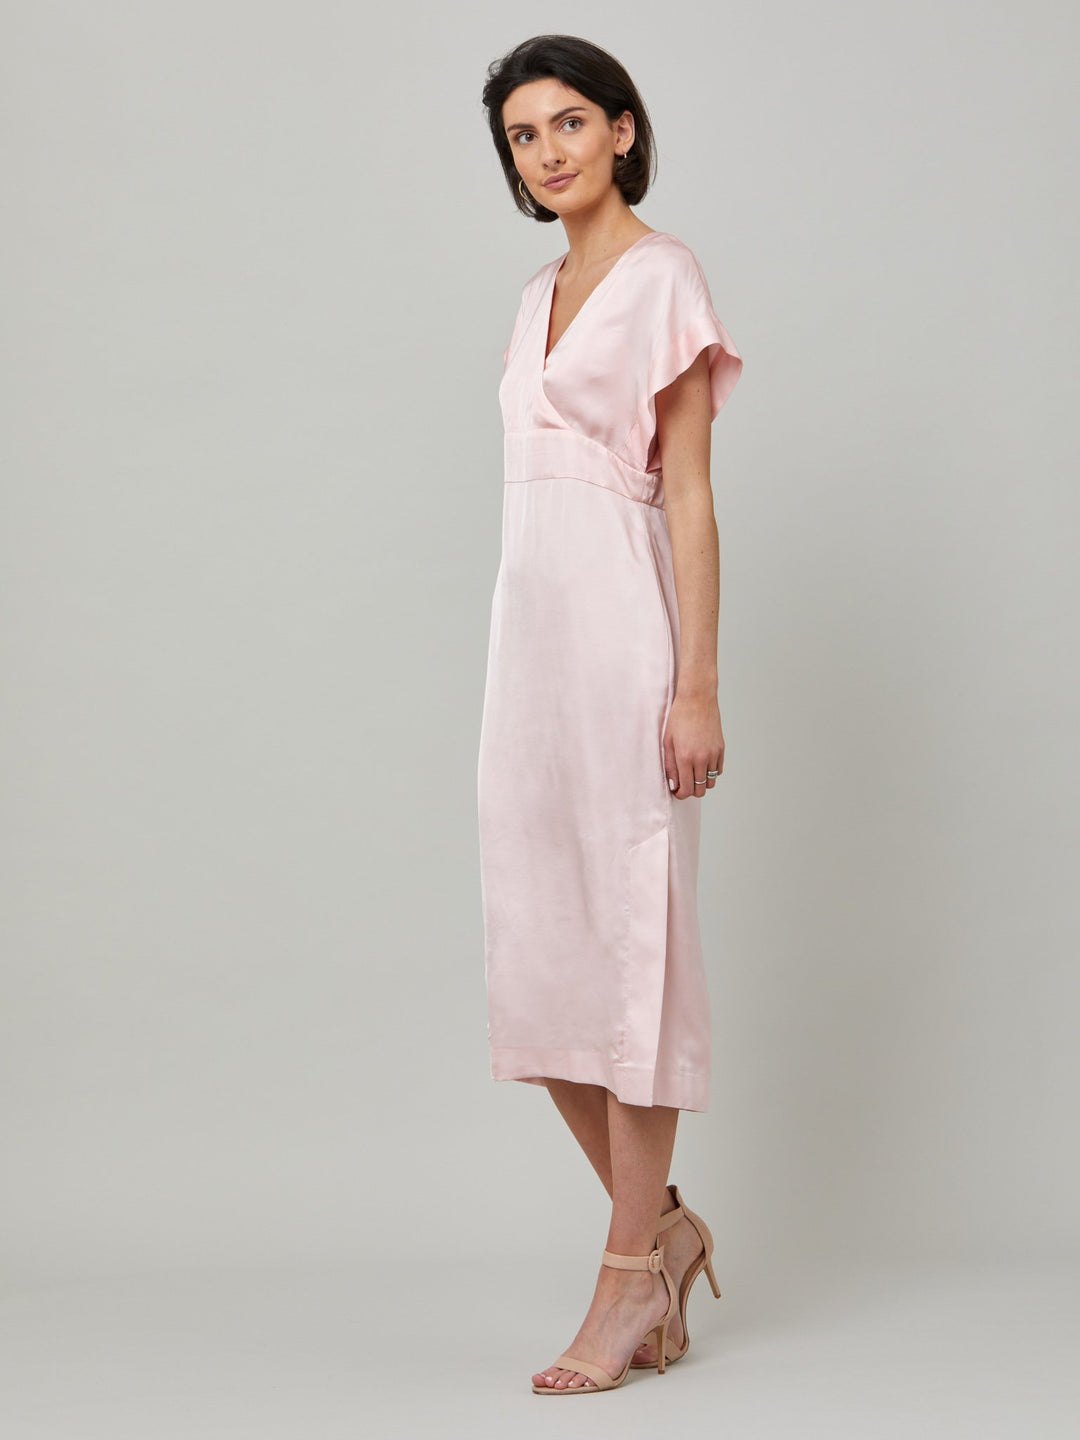 Classic occasion wear, modernized. Meet the Fleur dress in luxurious blossom pink satin viscose. An easy-fitting silhouette with a V-neckline, falls to the mid-calf and features side slit, pockets, and an elegant key-hole back neck detail. Attending a summer wedding? Mother of the bride? Heading to the races? This is the dress for you.